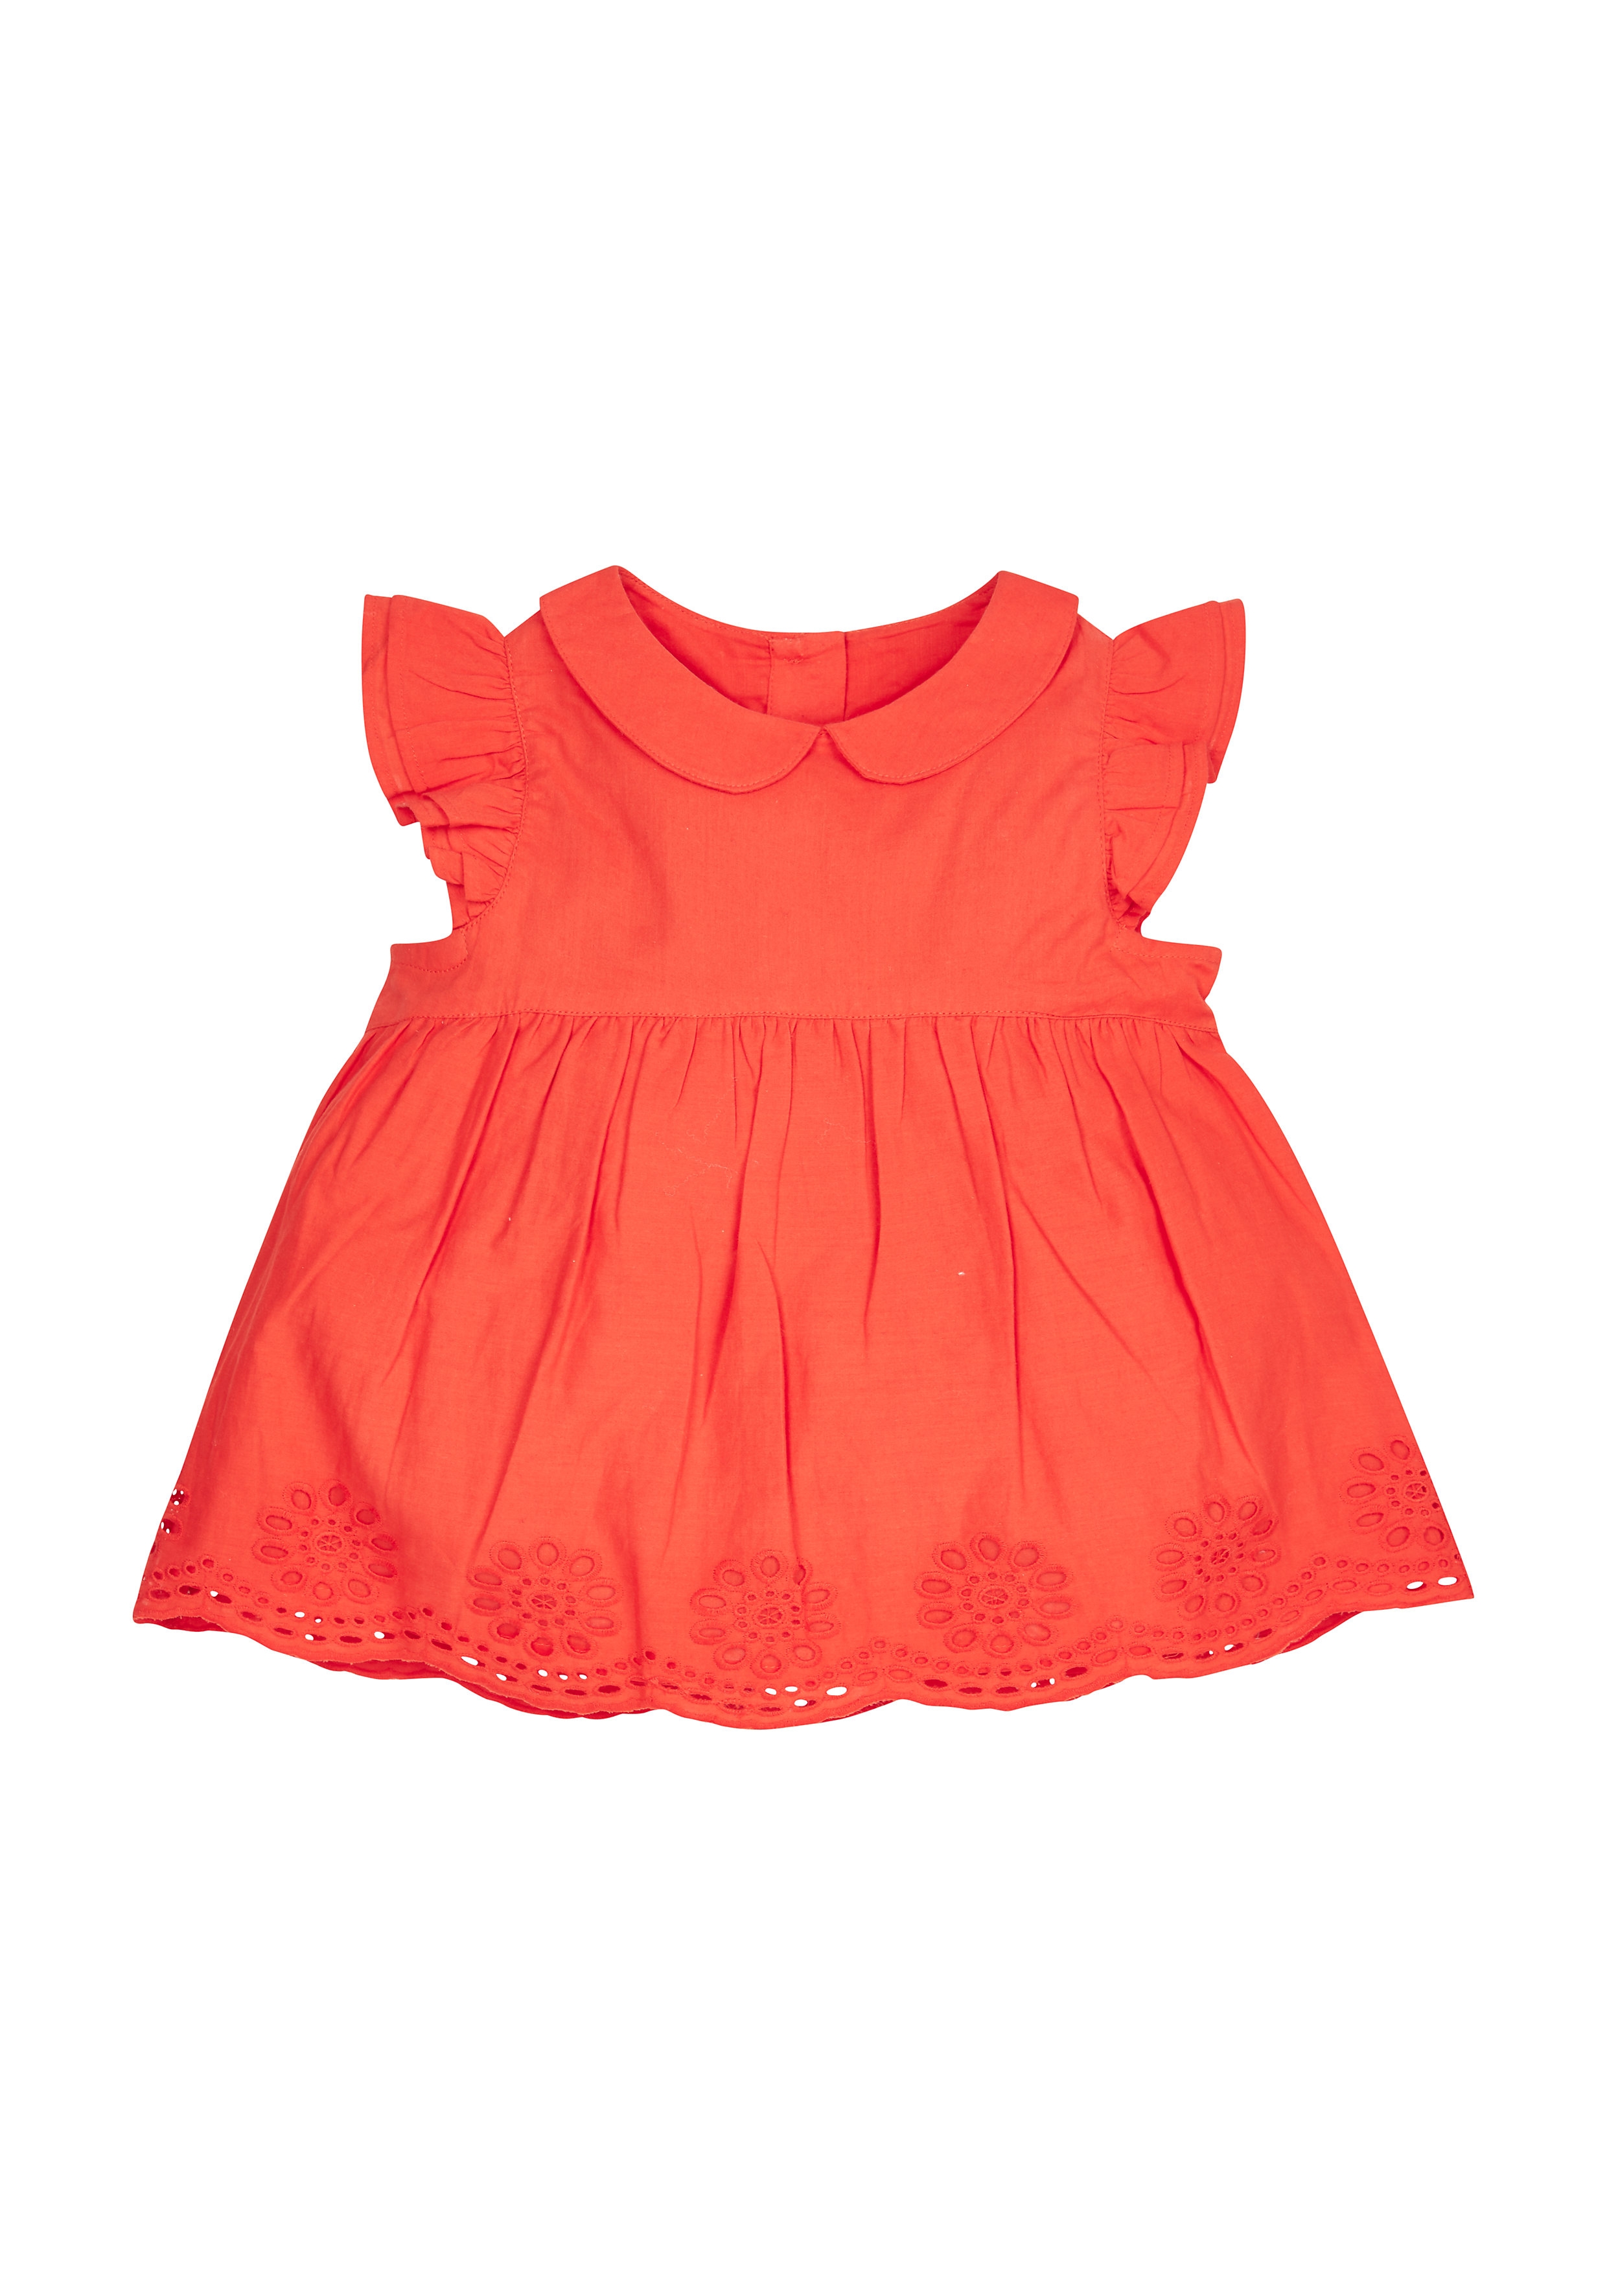 Mothercare | Girls Red Peter Pan Collar Blouse - Red